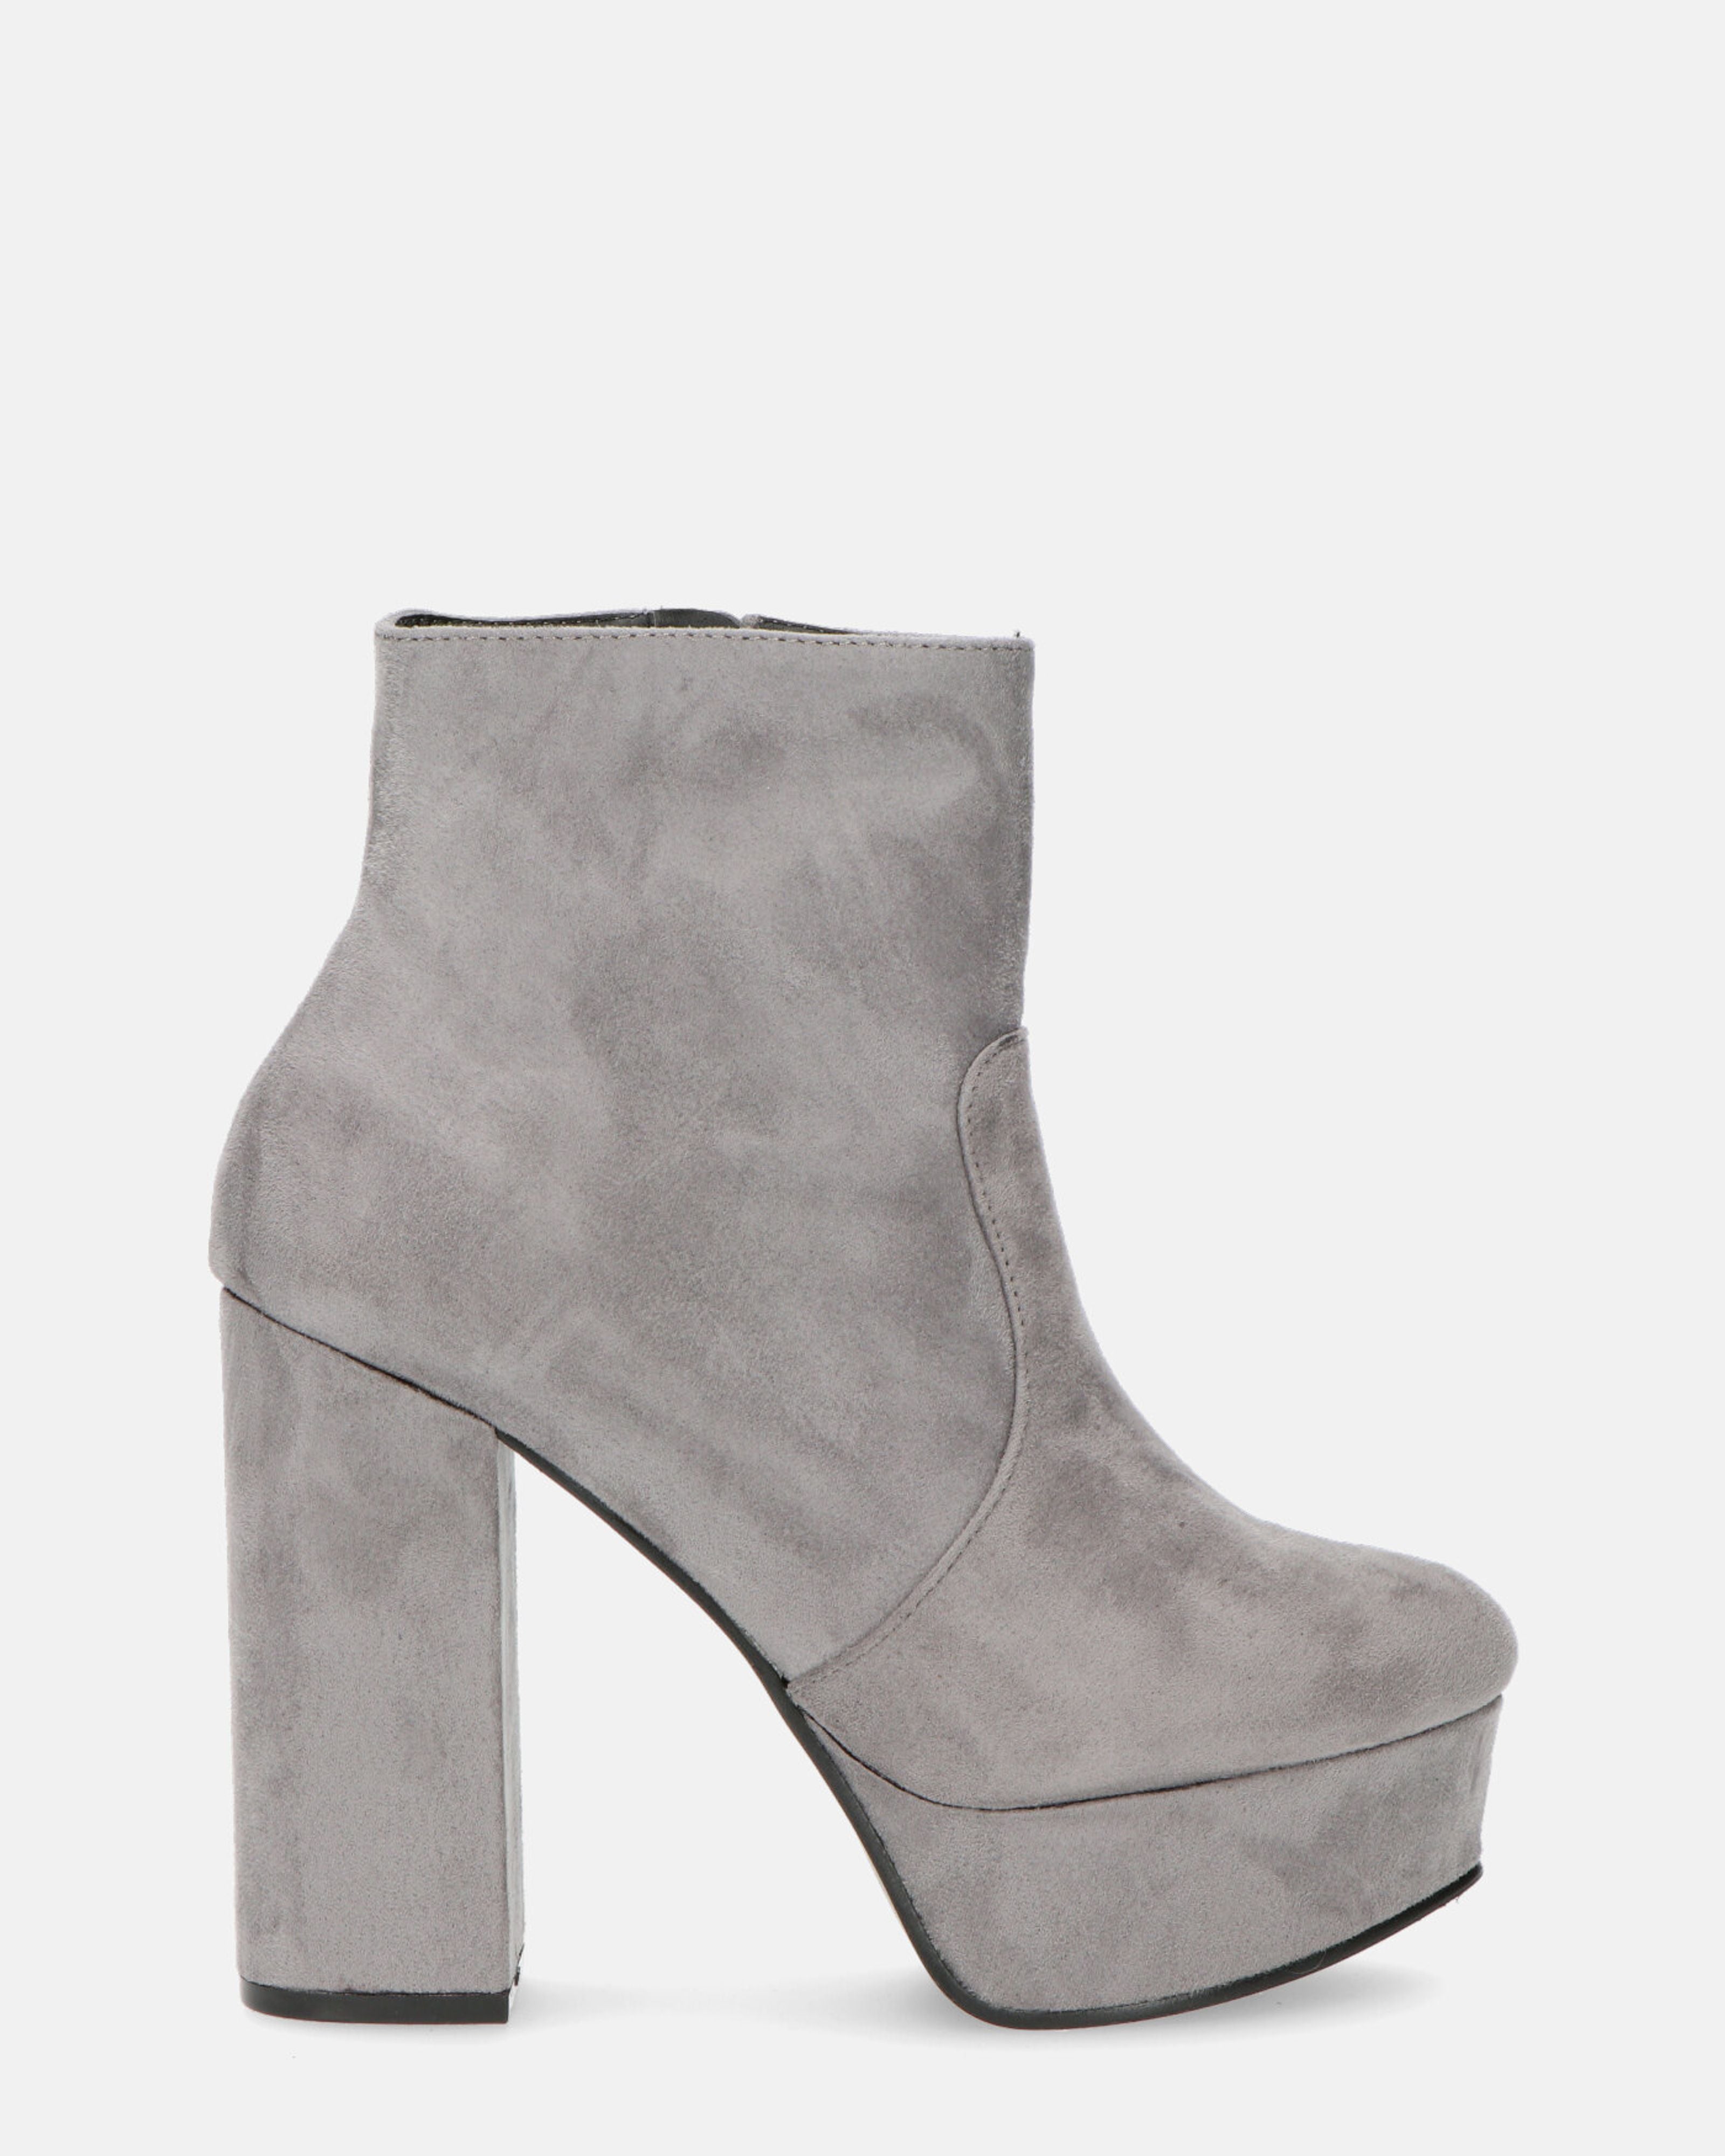 CHERIE - ankle boots in grey suede